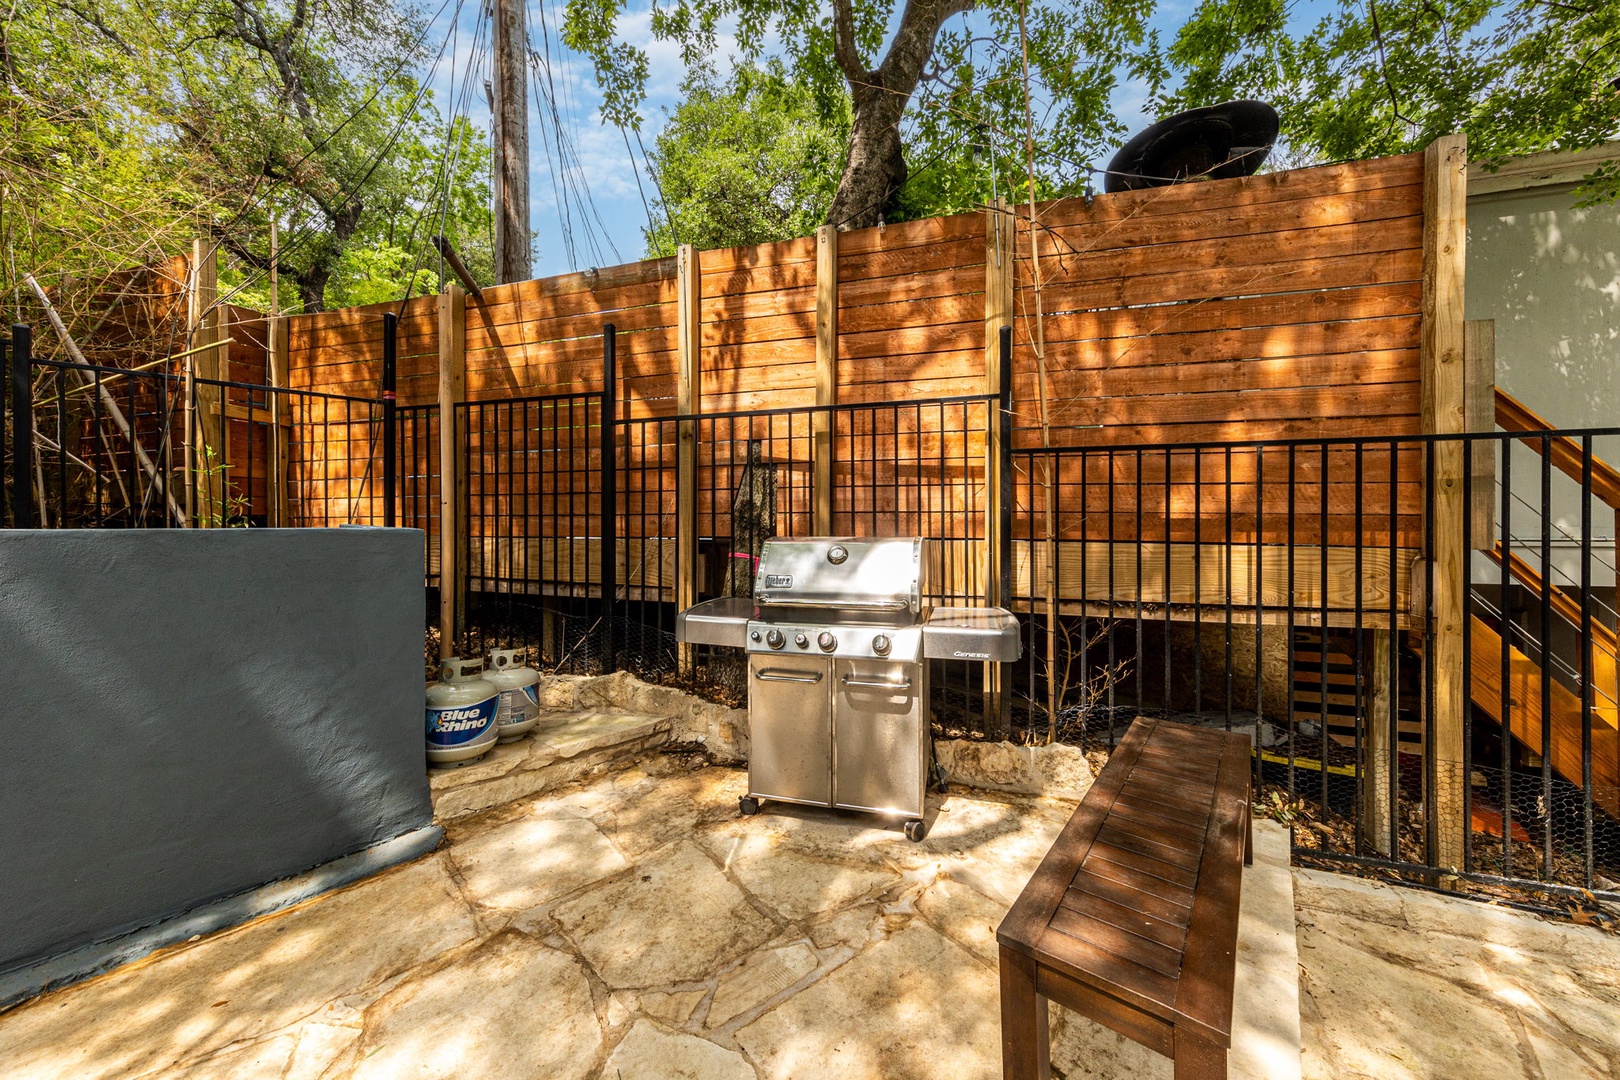 Unit B outdoor area equipped with gas grill